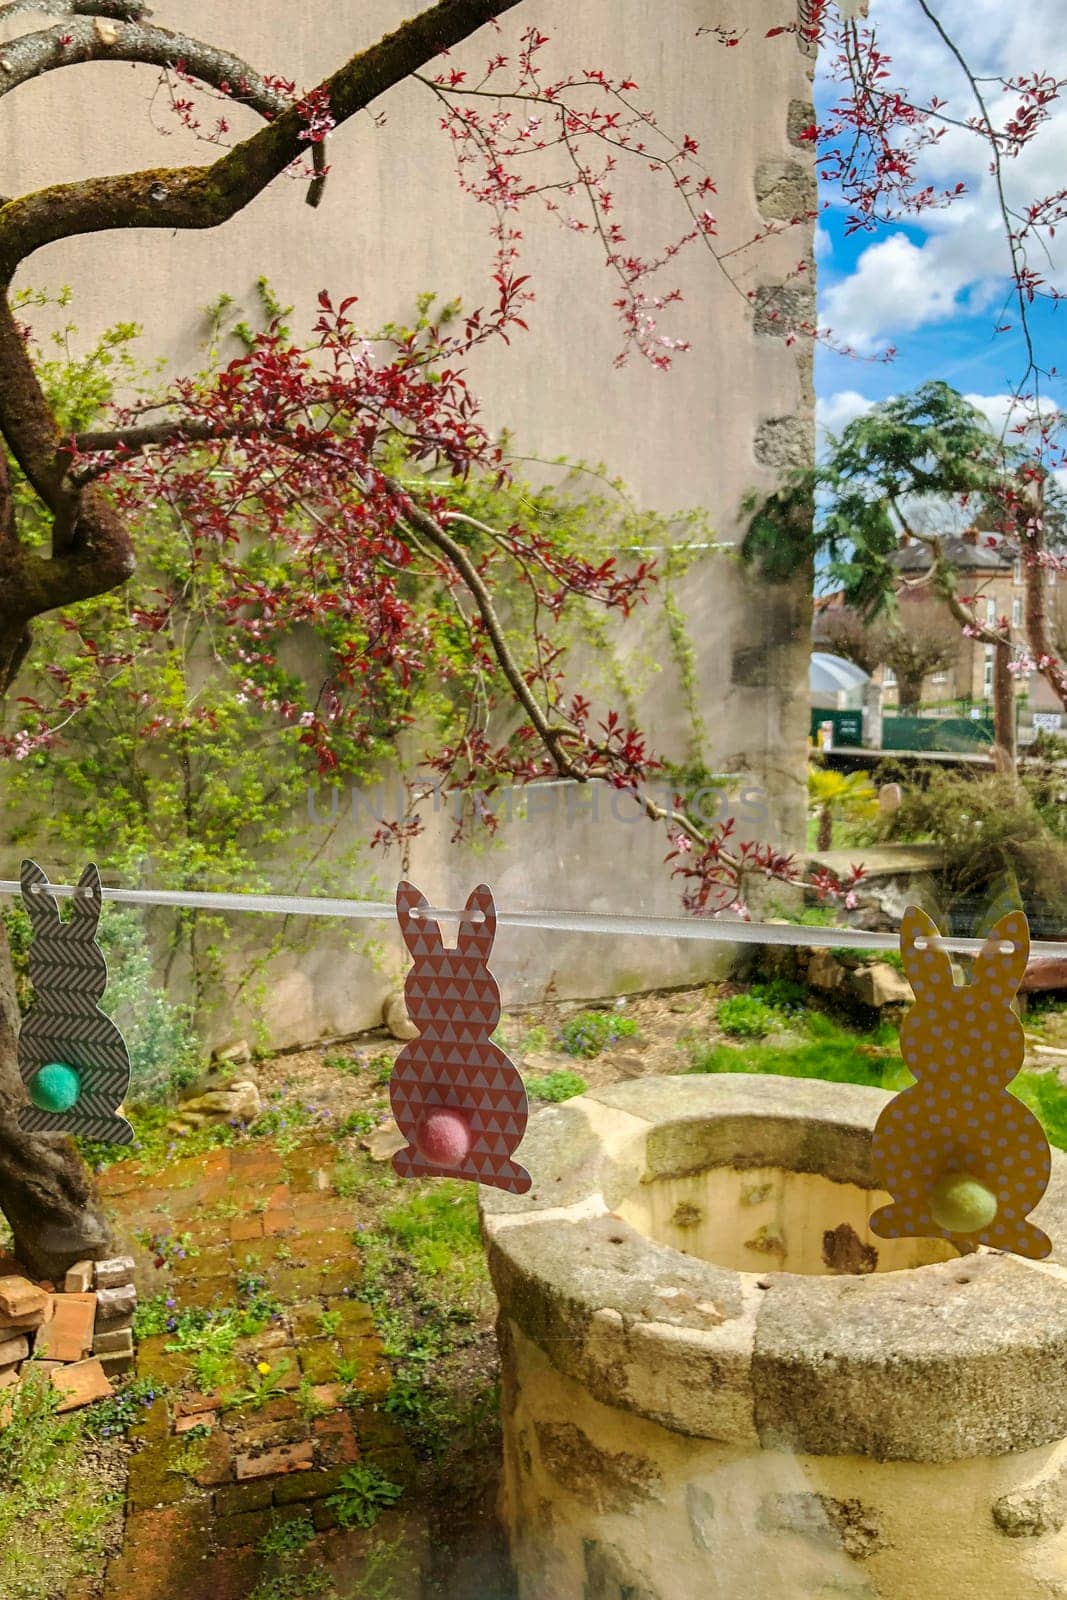 View of the garden through the window with Easter bunnies Decoration